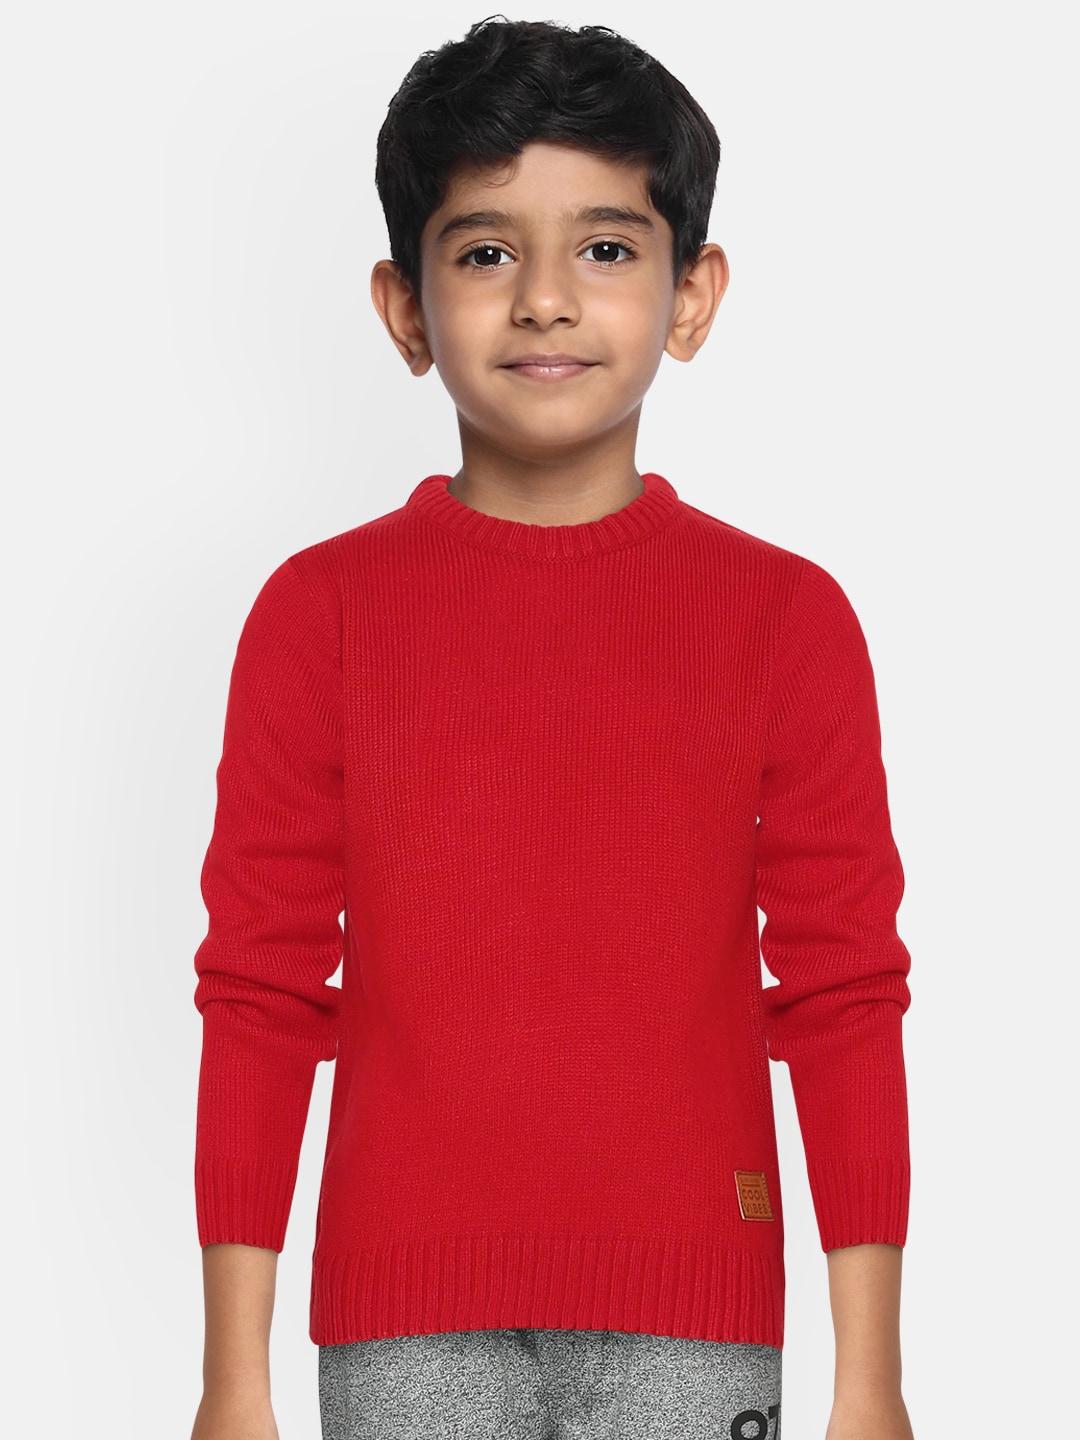 yk-boys-red-solid-round-neck-pullover